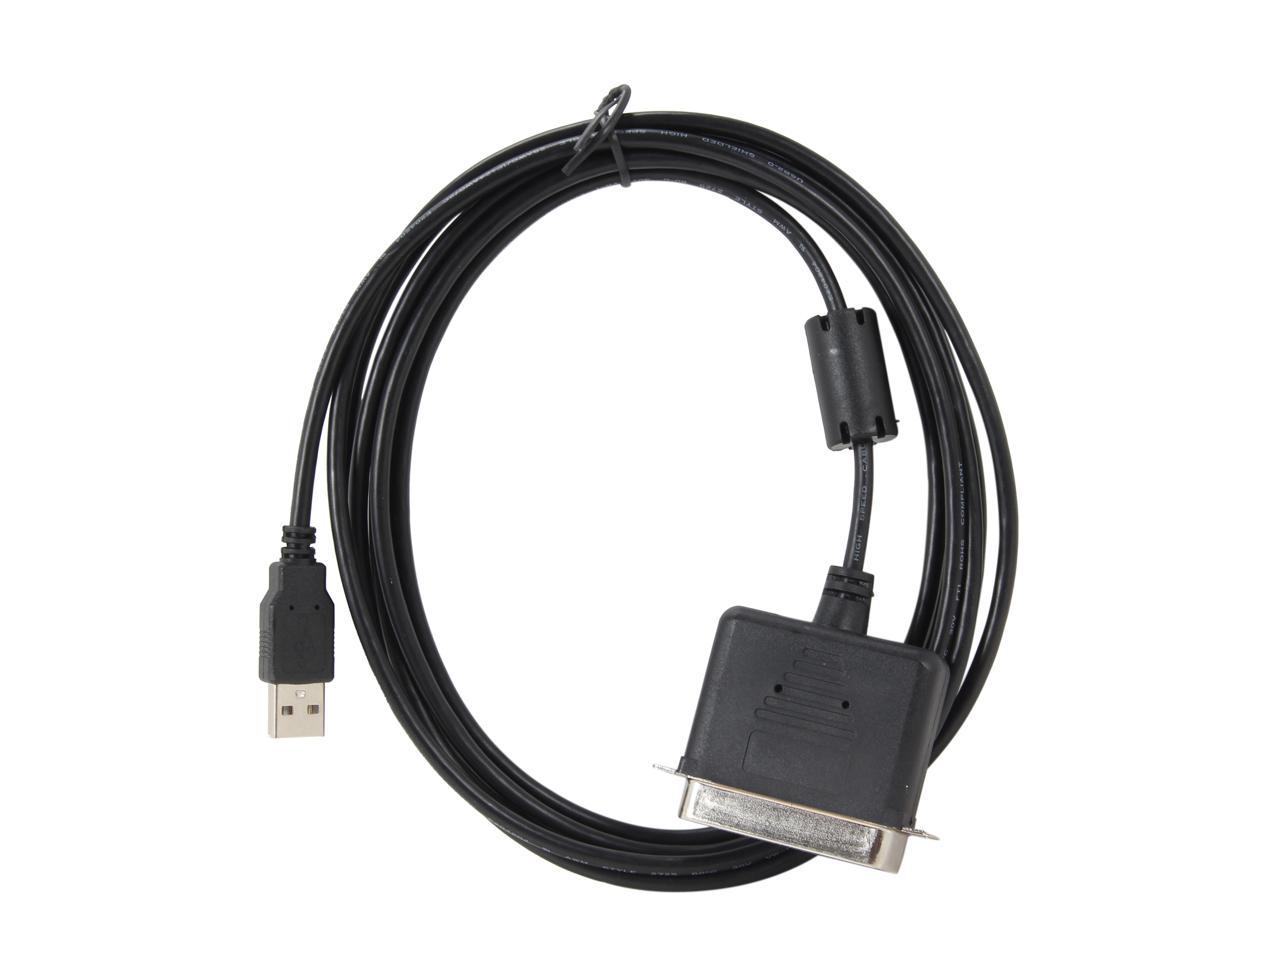 StarTech.com Model ICUSB128410 10 ft. USB to Parallel Printer Adapter - image 2 of 3